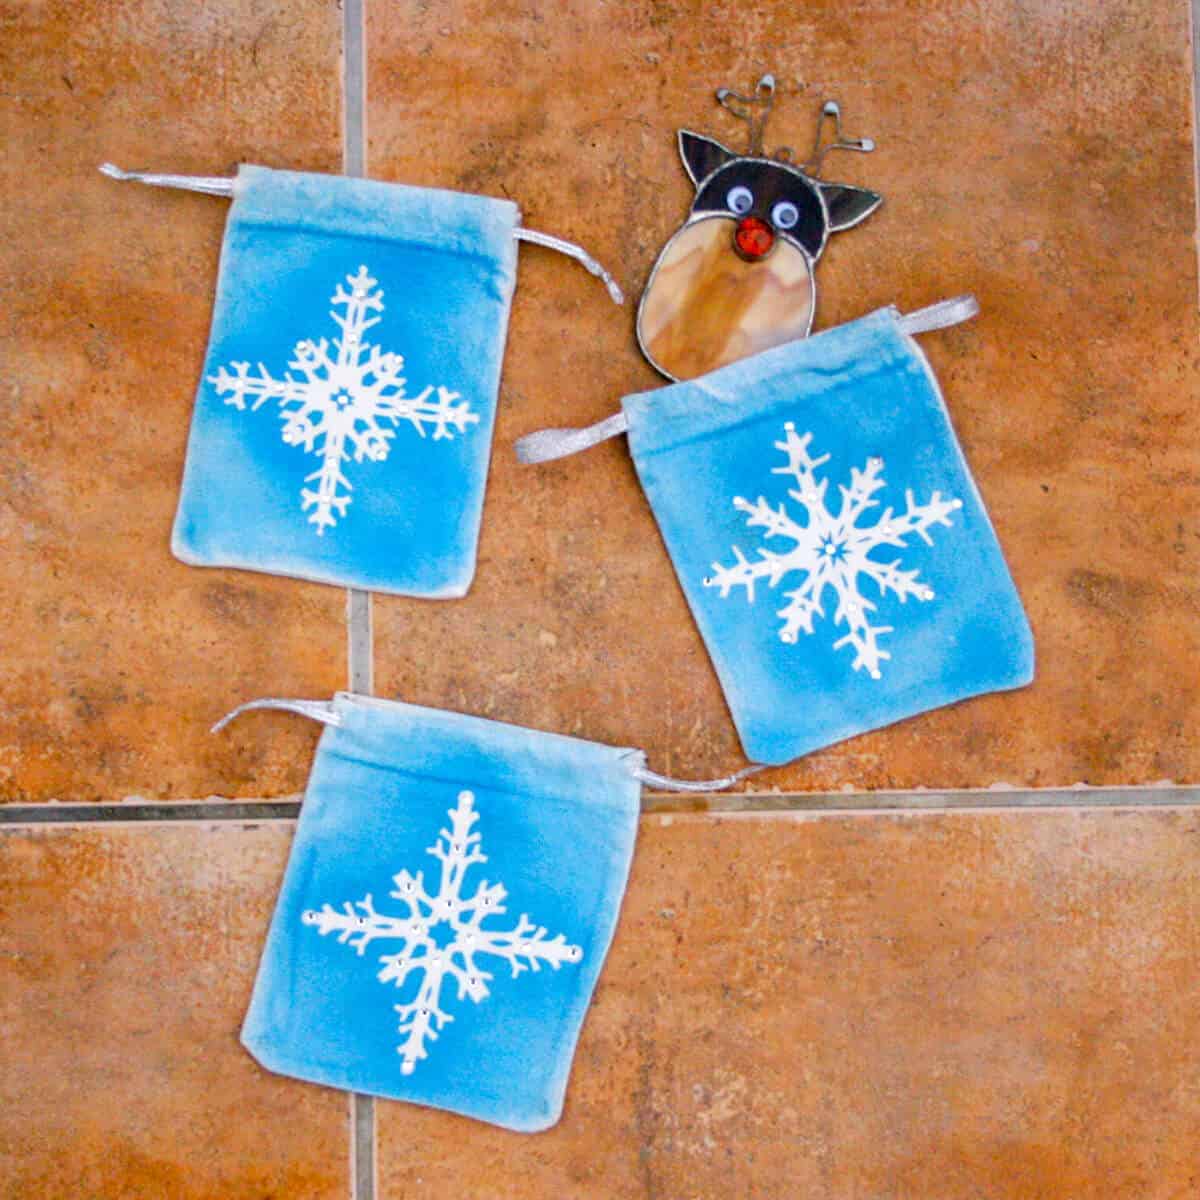 3 snowflake pouches with a homemade stained glass reindeer ornament